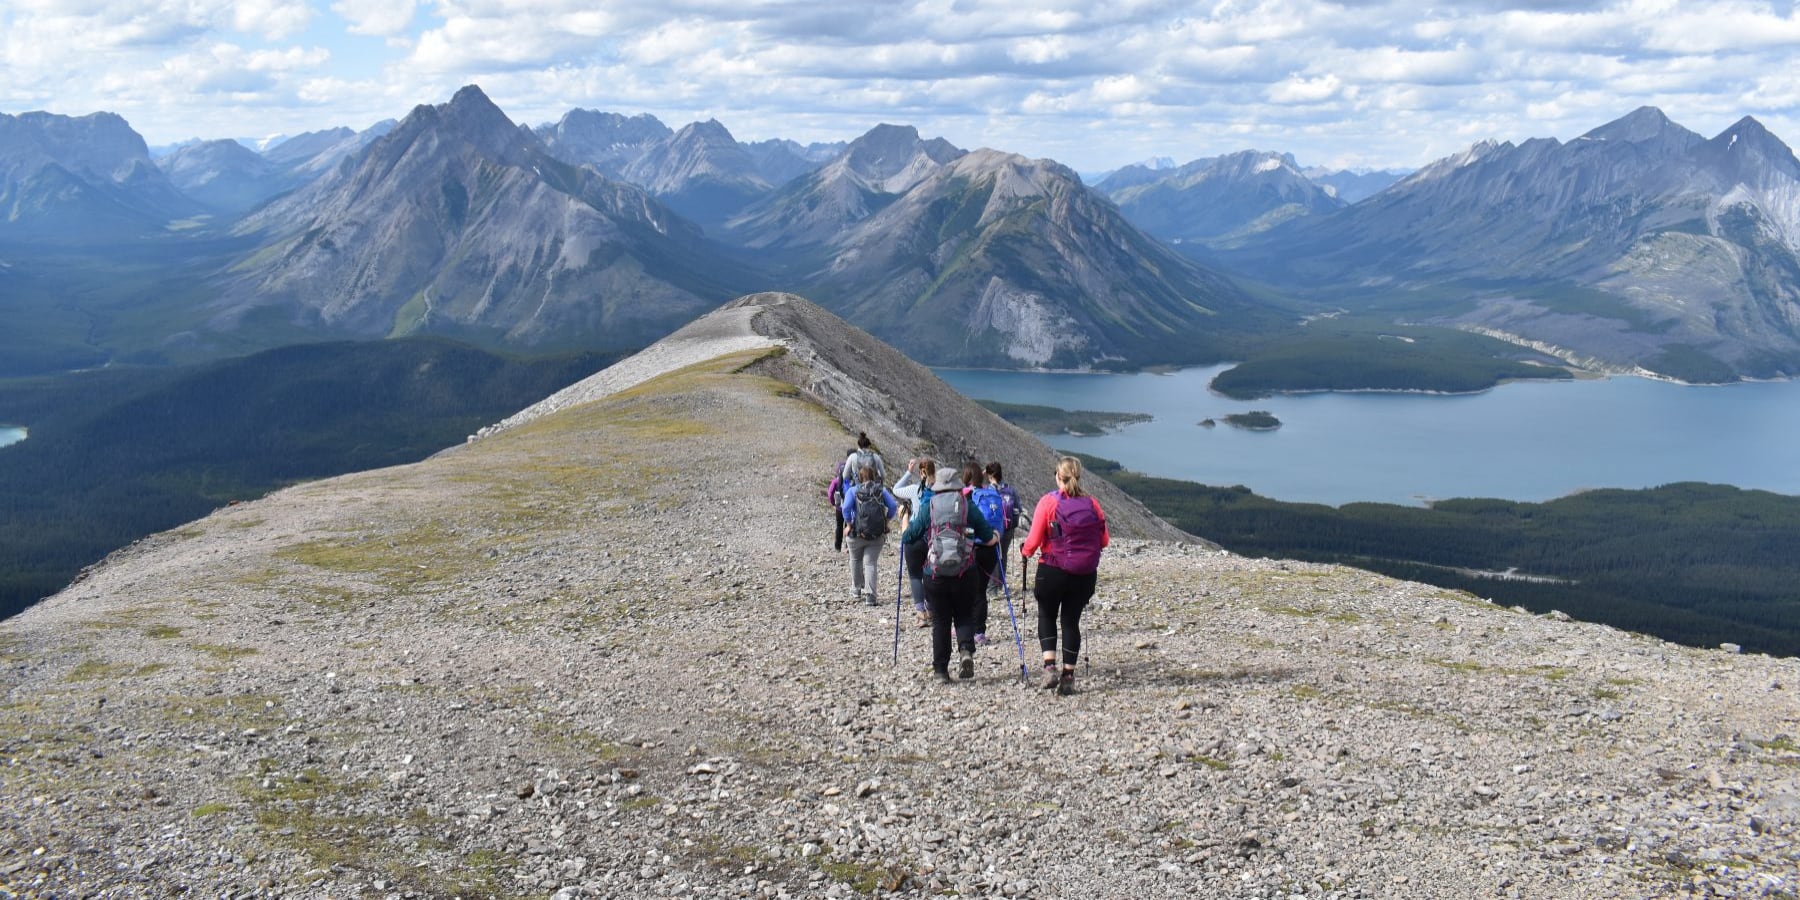 Trekking In The Canadian Rockies - 7 Amazing Multi-Day Backpacking  Adventures!